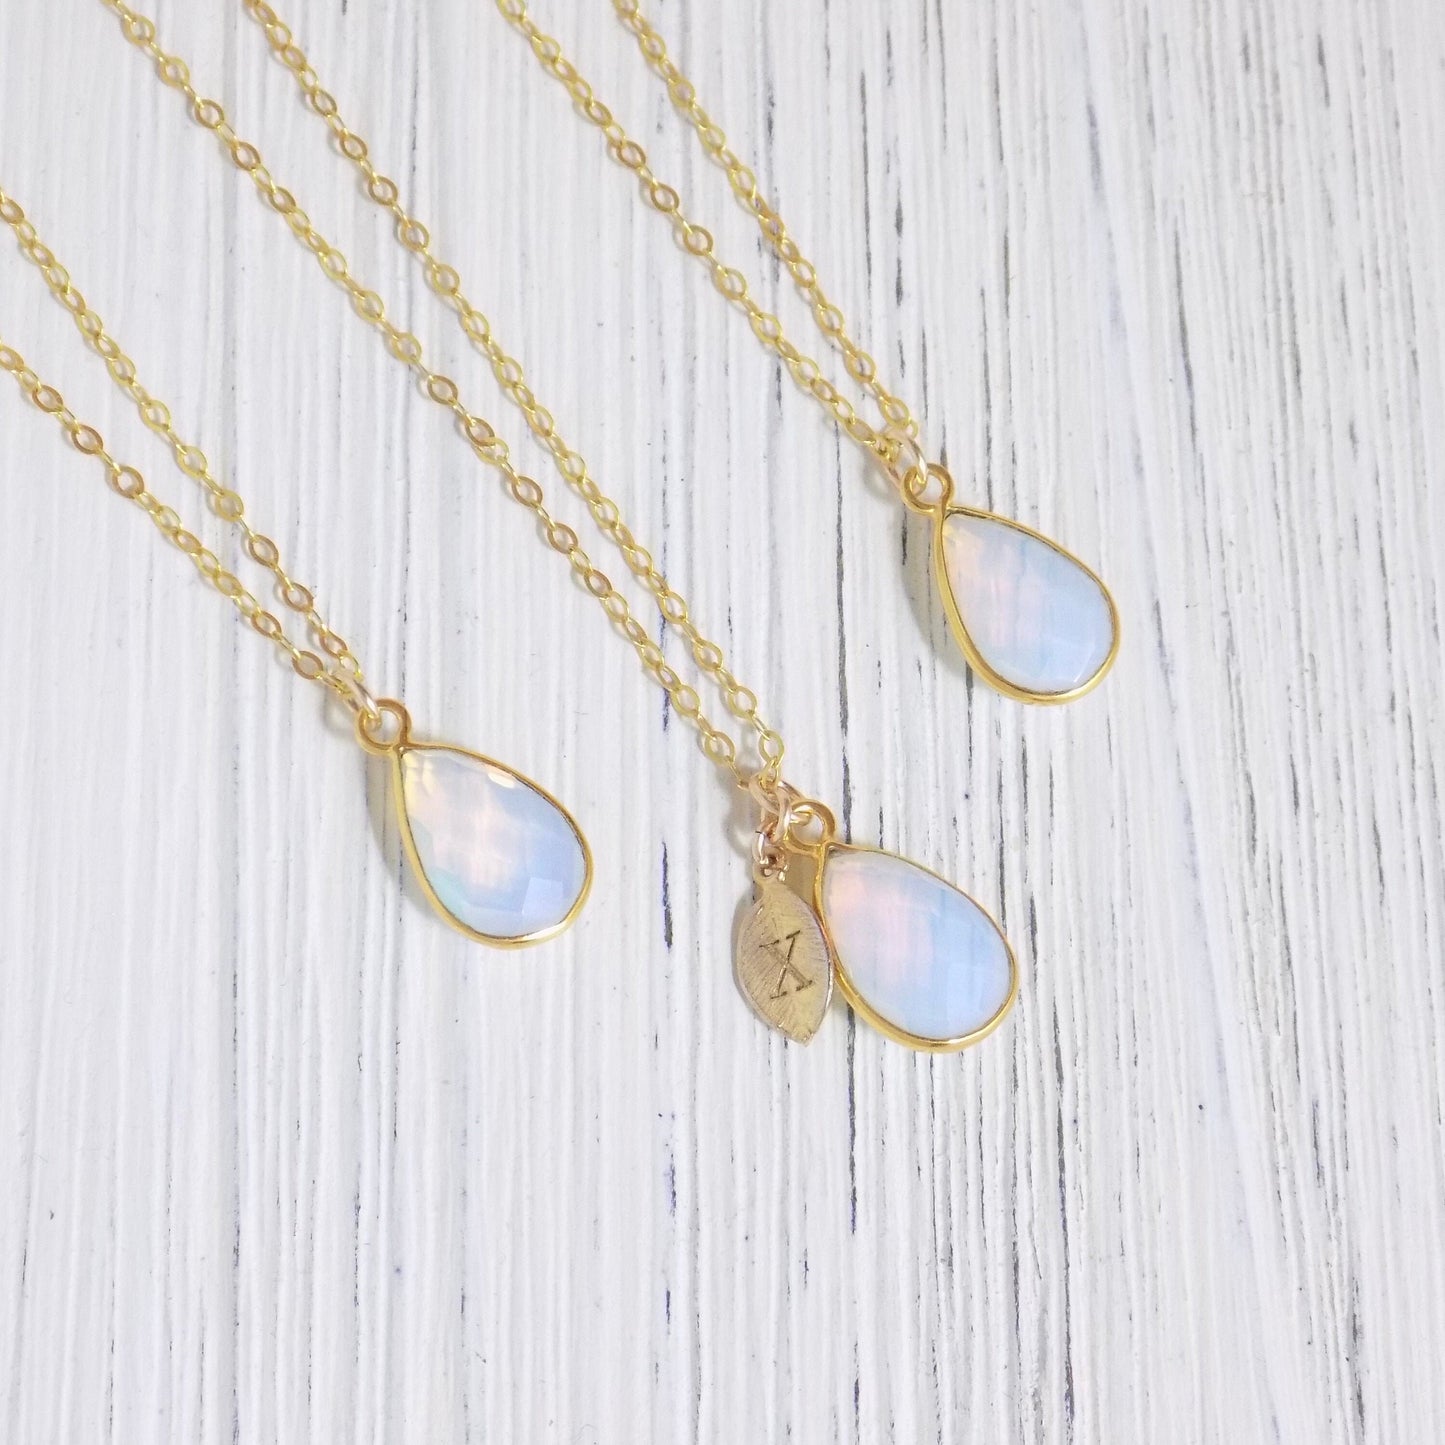 Mothers Day Gift, Opalite Necklace Gold, Personalized Initial, Teardrop Stone Necklace, Opal Jewelry Gifts Mom, Gift For Wife, M4-65